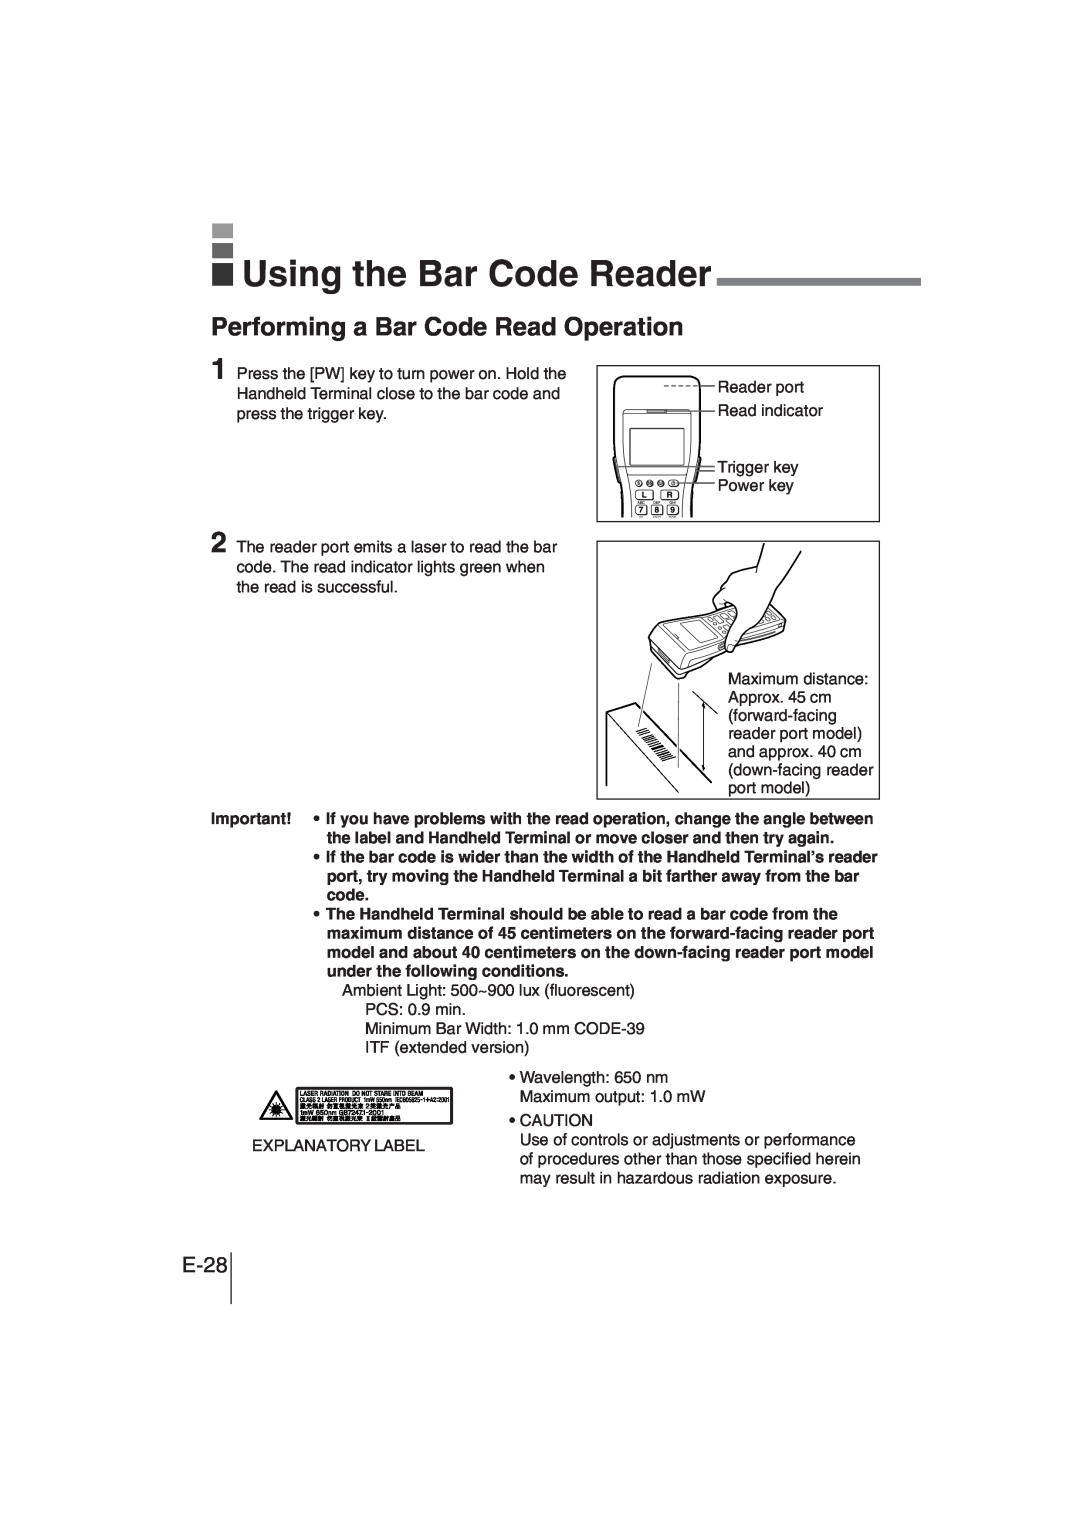 Casio DT-930 manual Using the Bar Code Reader, Performing a Bar Code Read Operation, E-28 